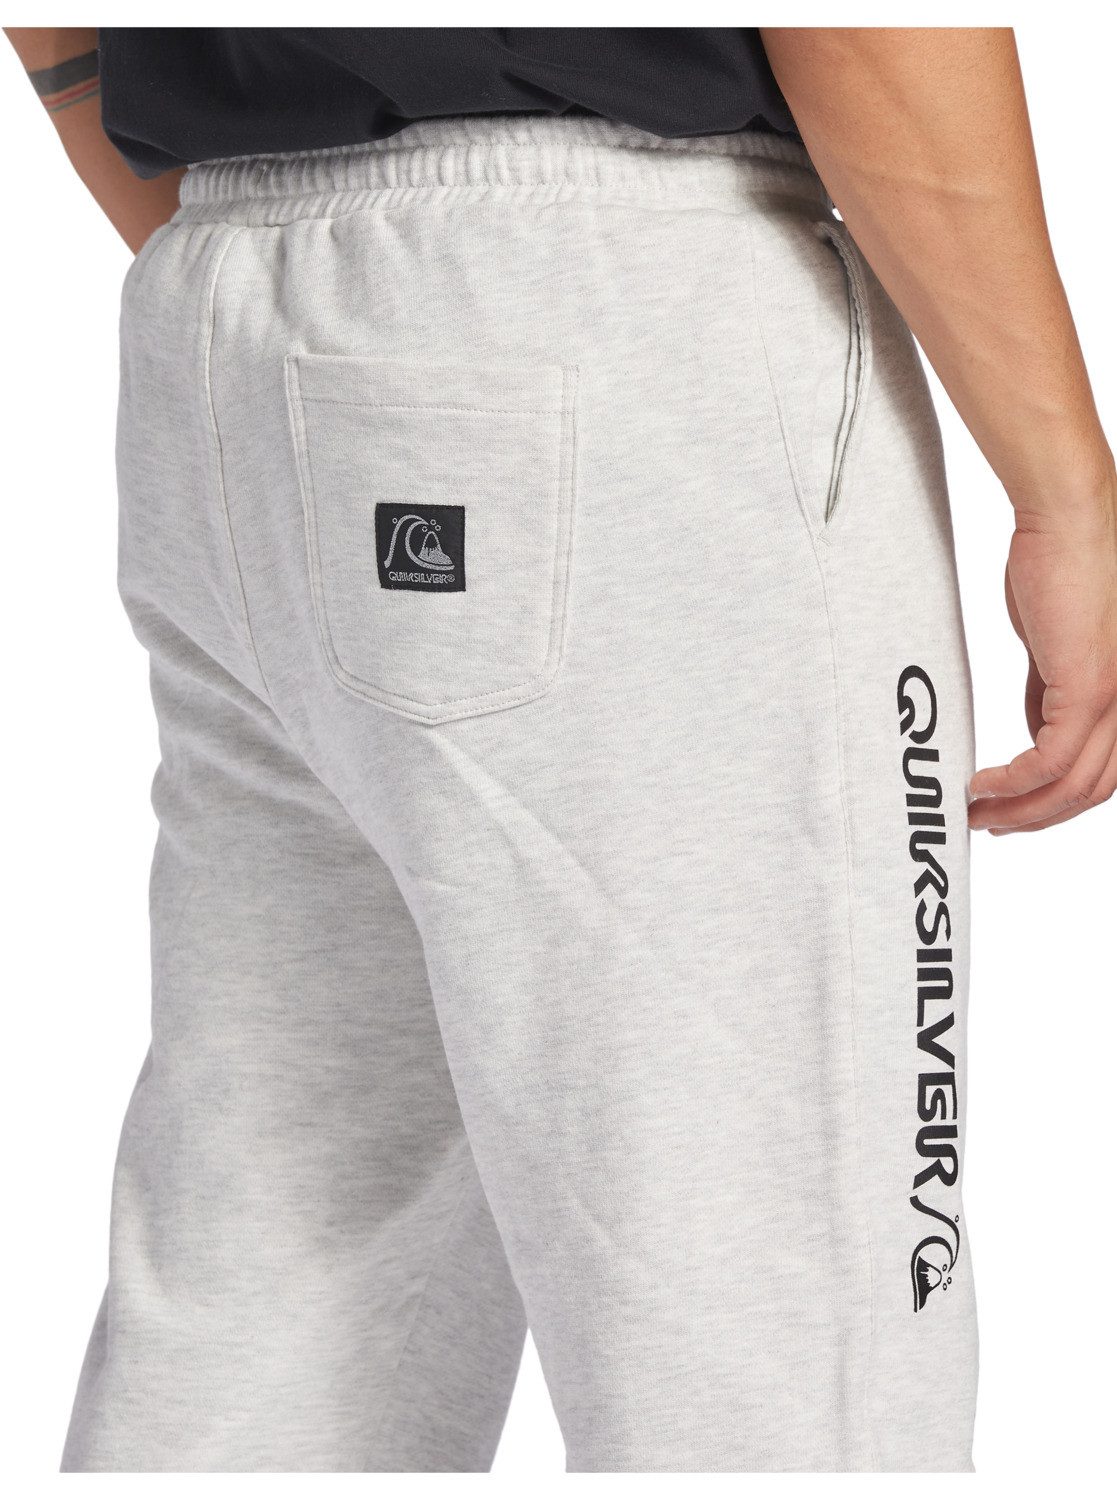 Heather The Pants White Quiksilver Original Marble Jogger